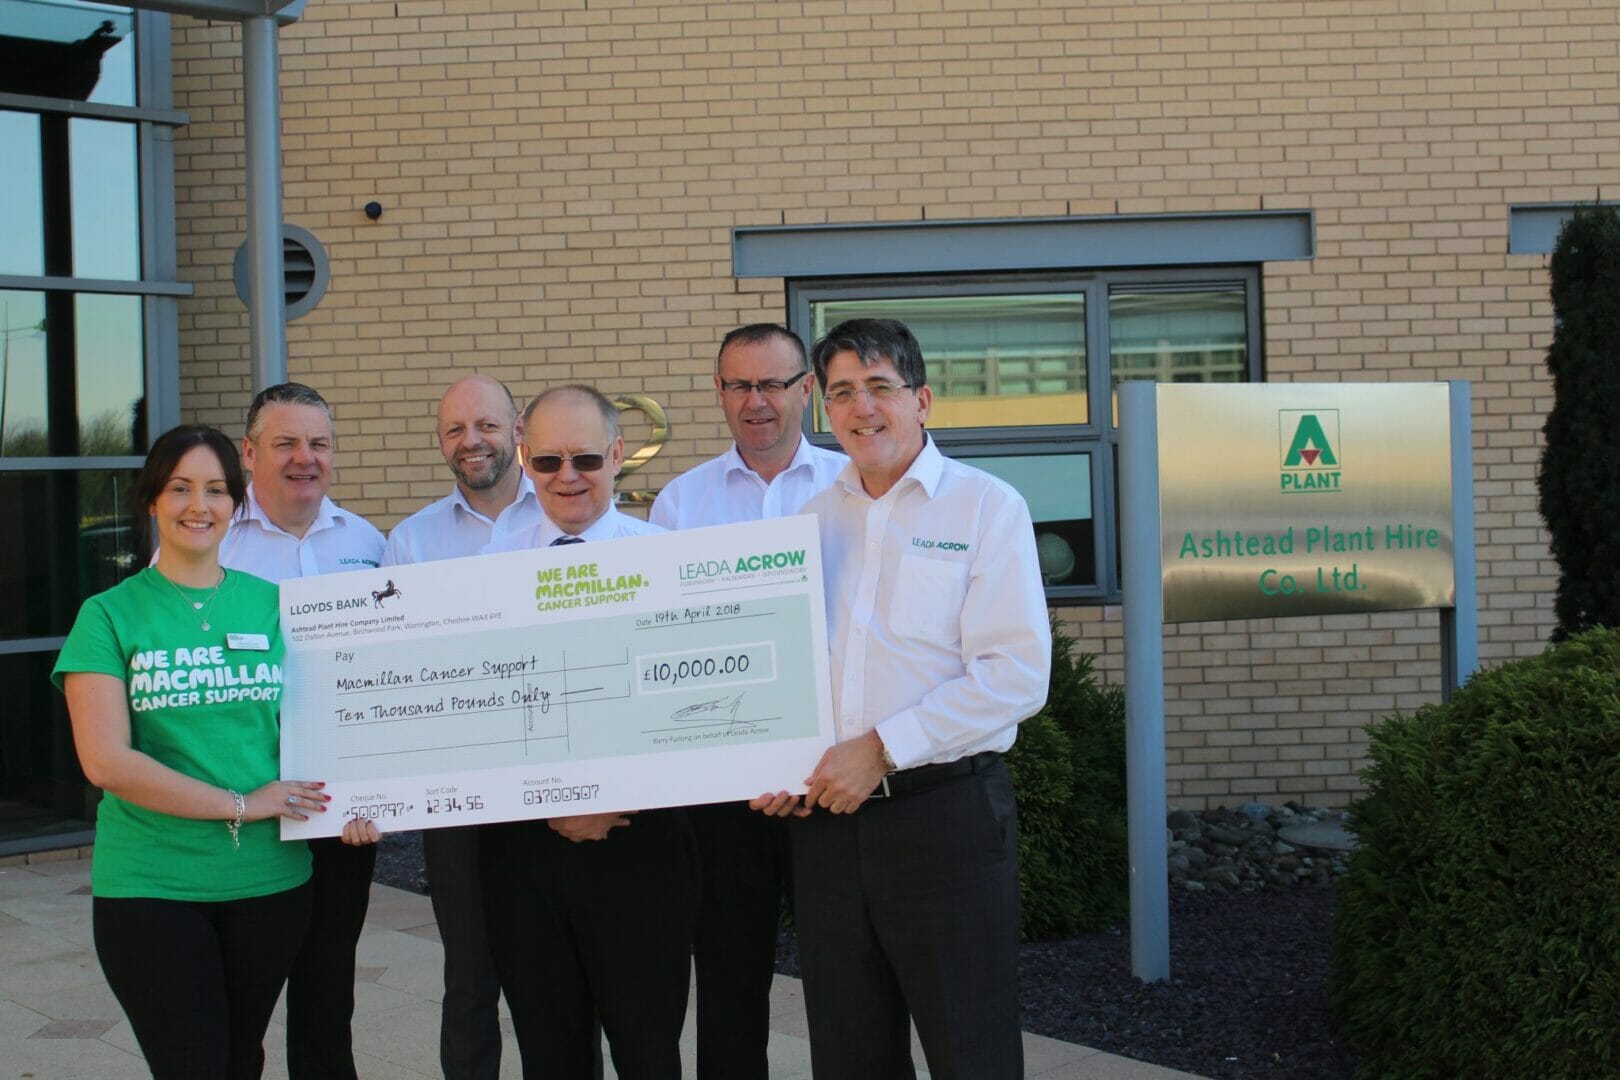 Leada Acrow’s charity fun nets £10k for Macmillan Cancer Support @aplant_hire @macmillancancer